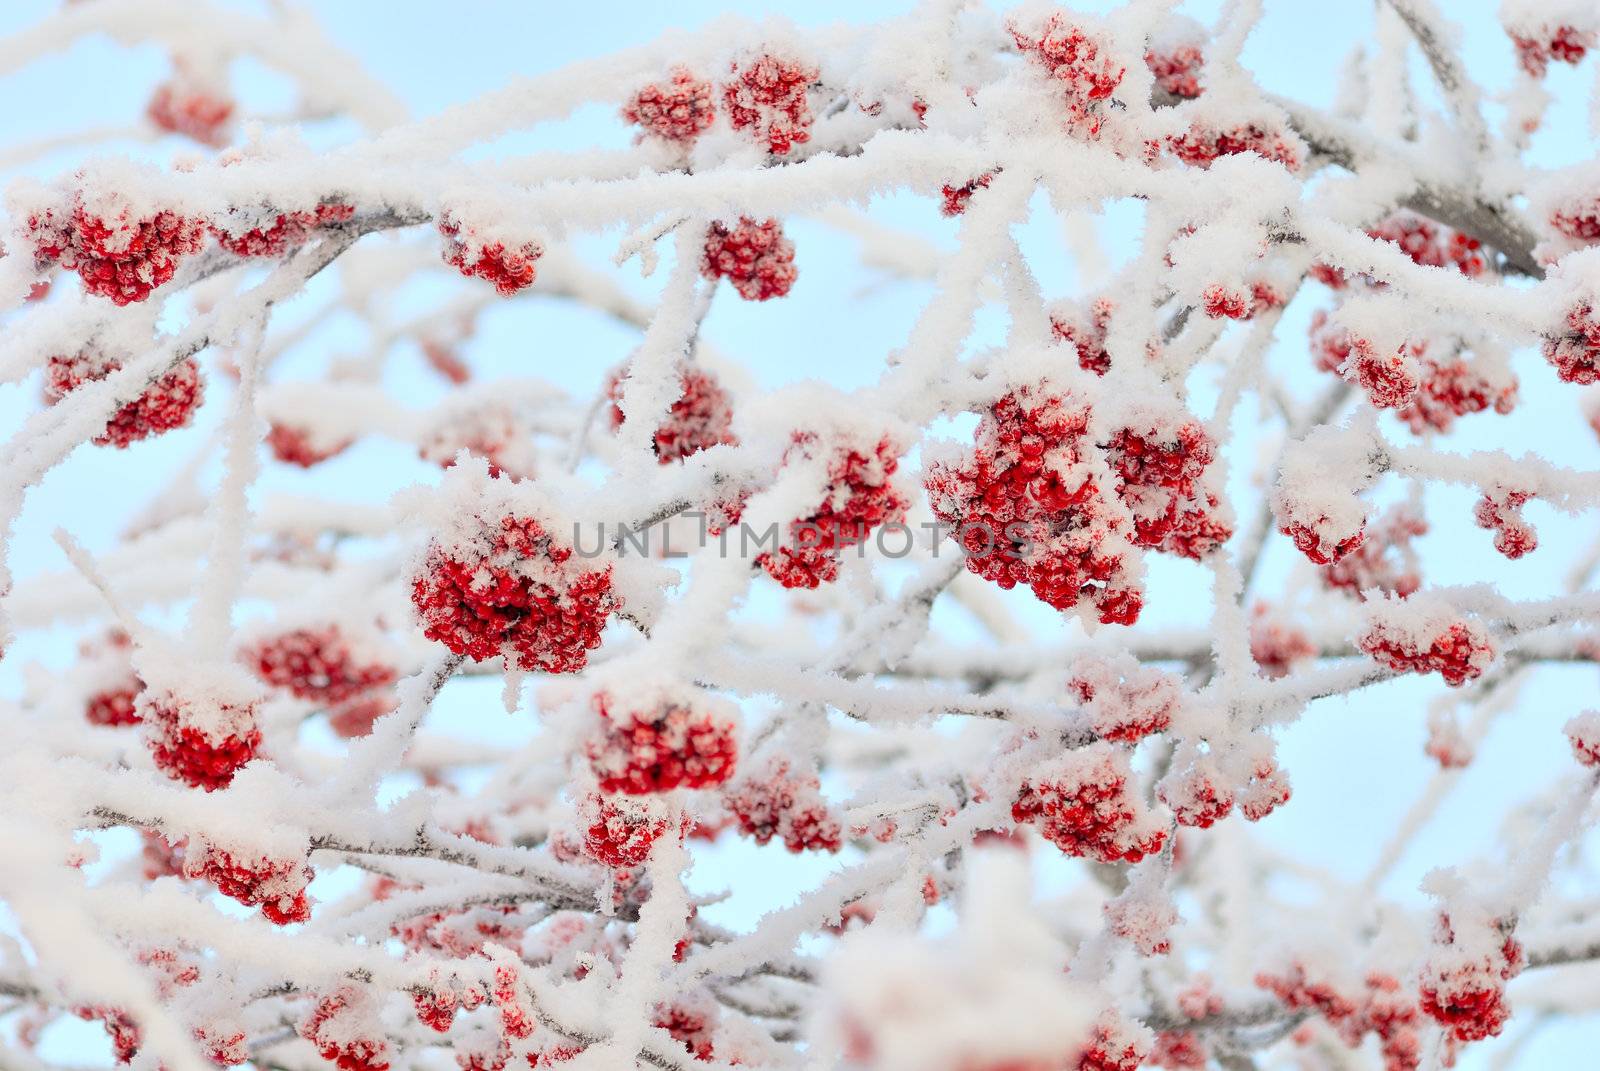 The branches of ashberry under snow like sweeties  by makspogonii